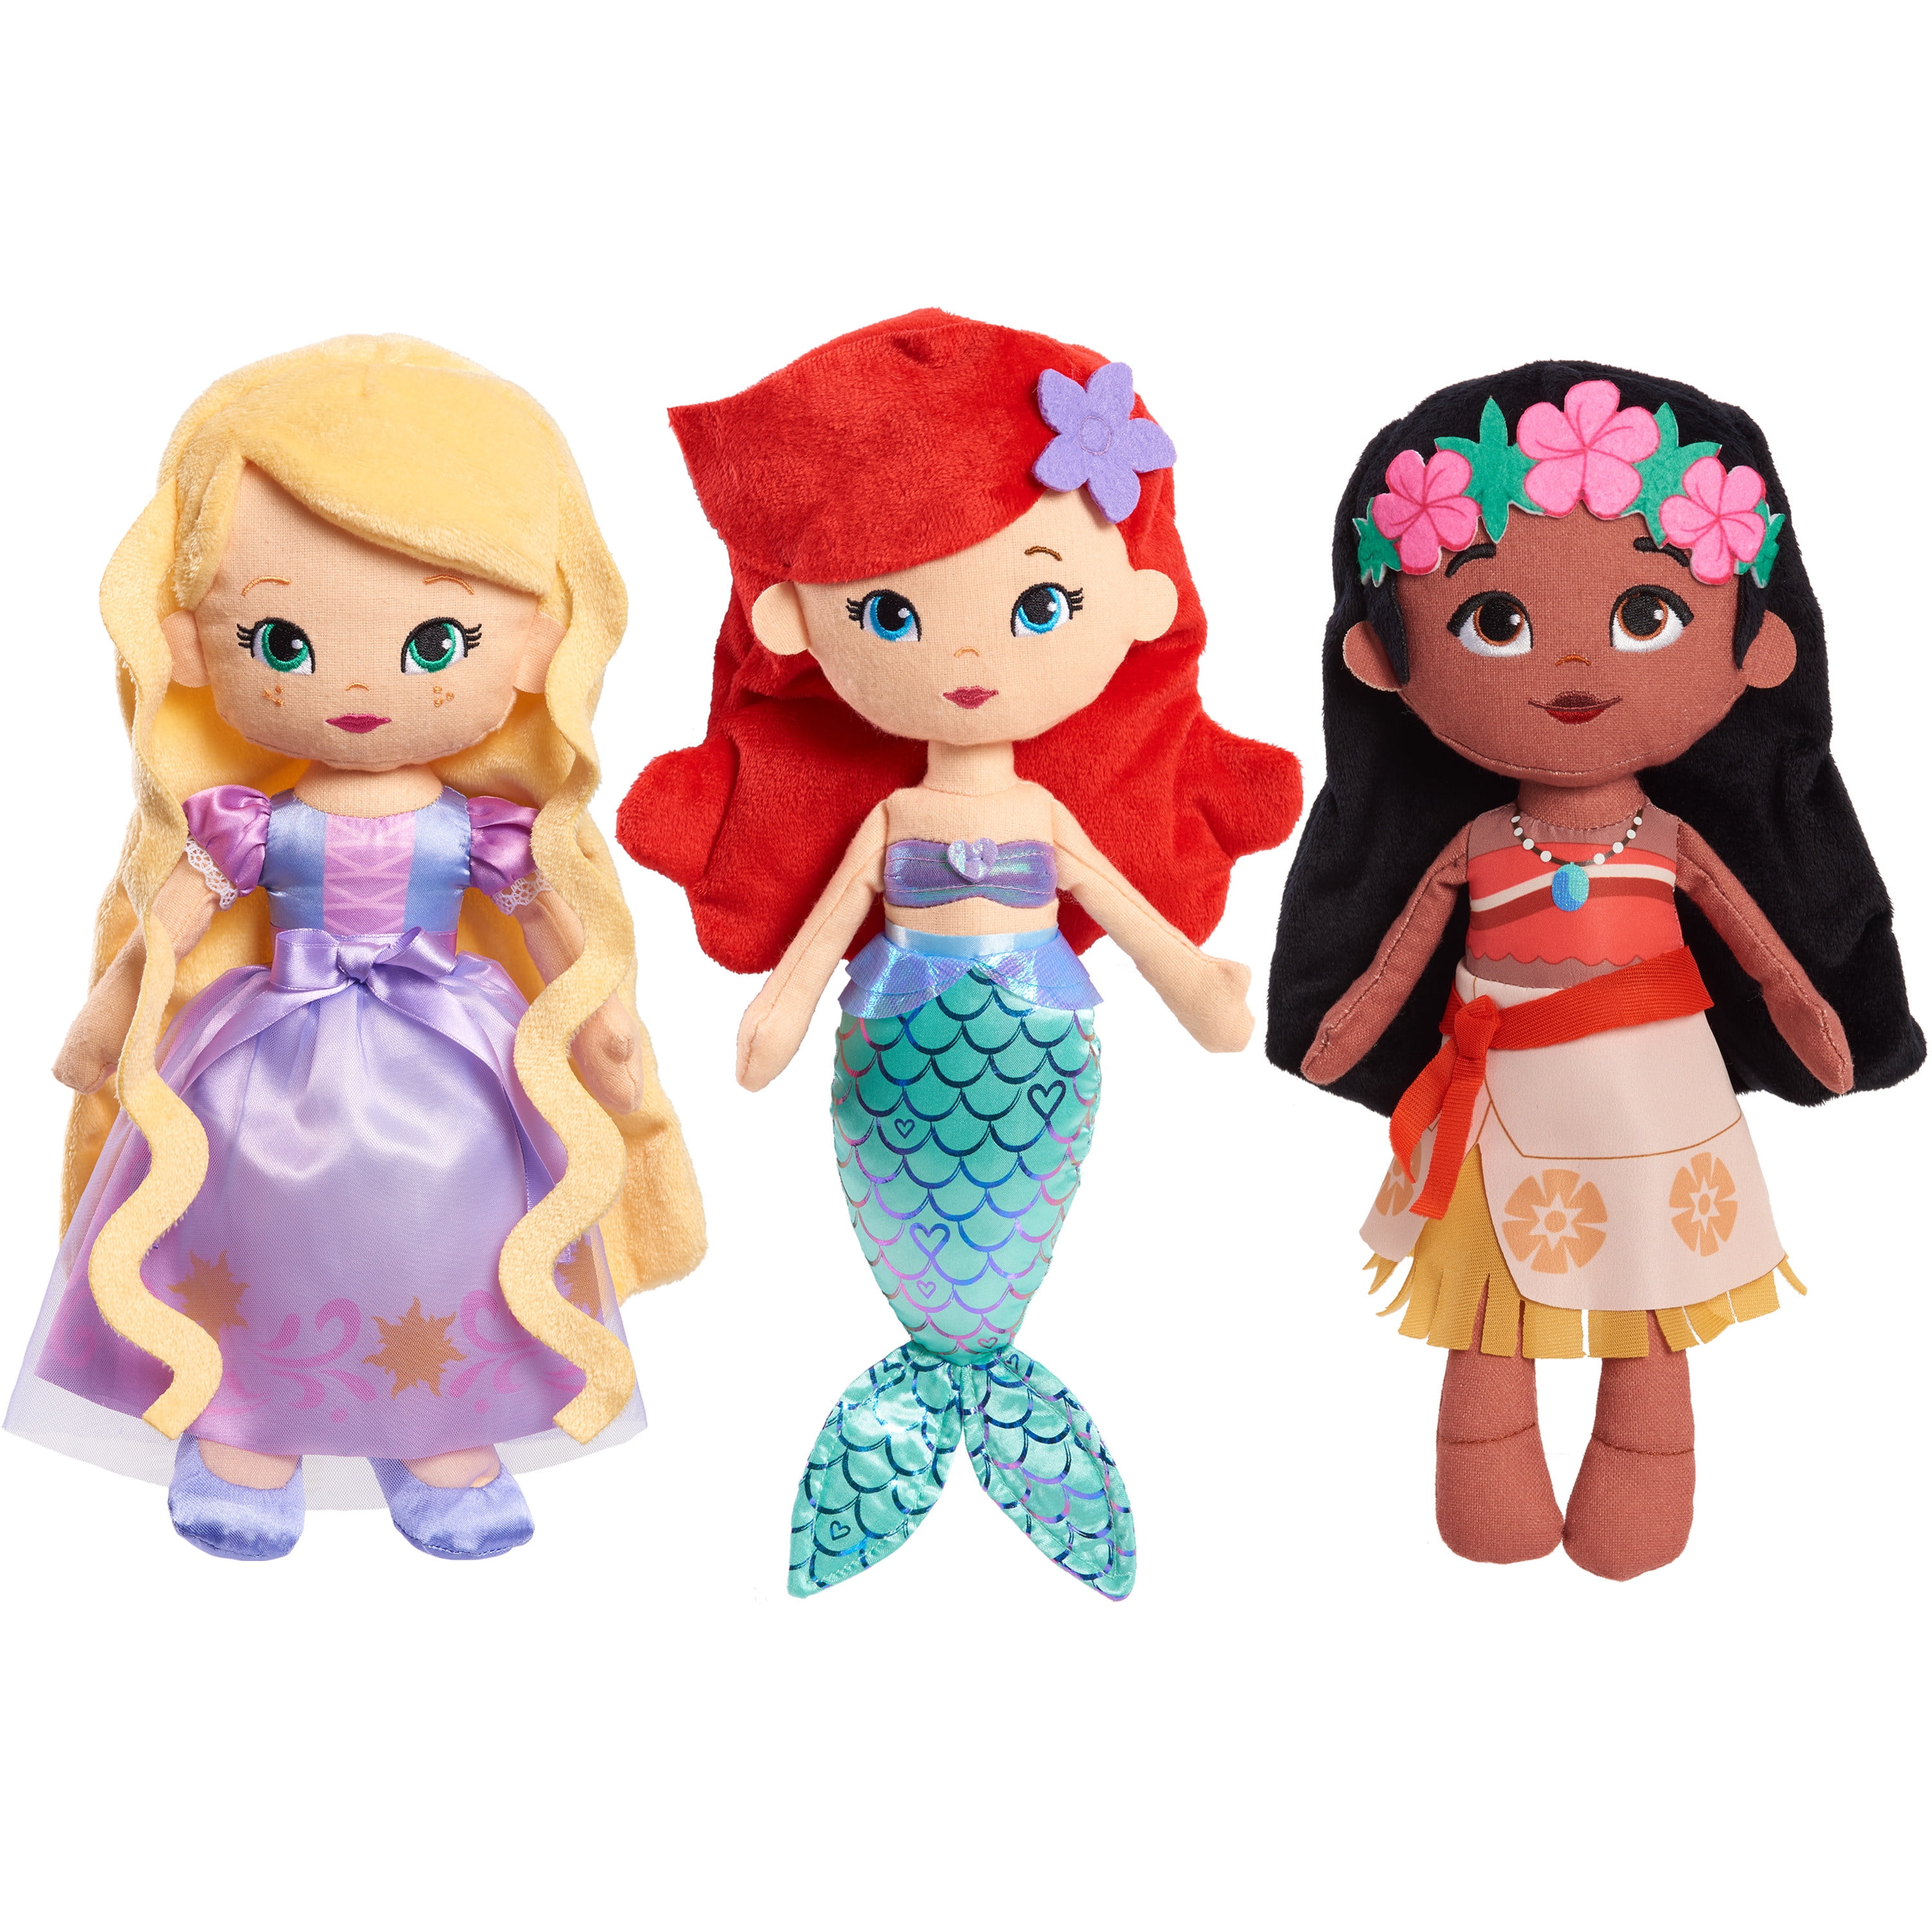 Disney Princess So Sweet Princess Plush 3-Piece Bundle Set Includes  Rapunzel, Moana, and Ariel, Kids Toys for Ages 3 Up, Gifts and Presents 